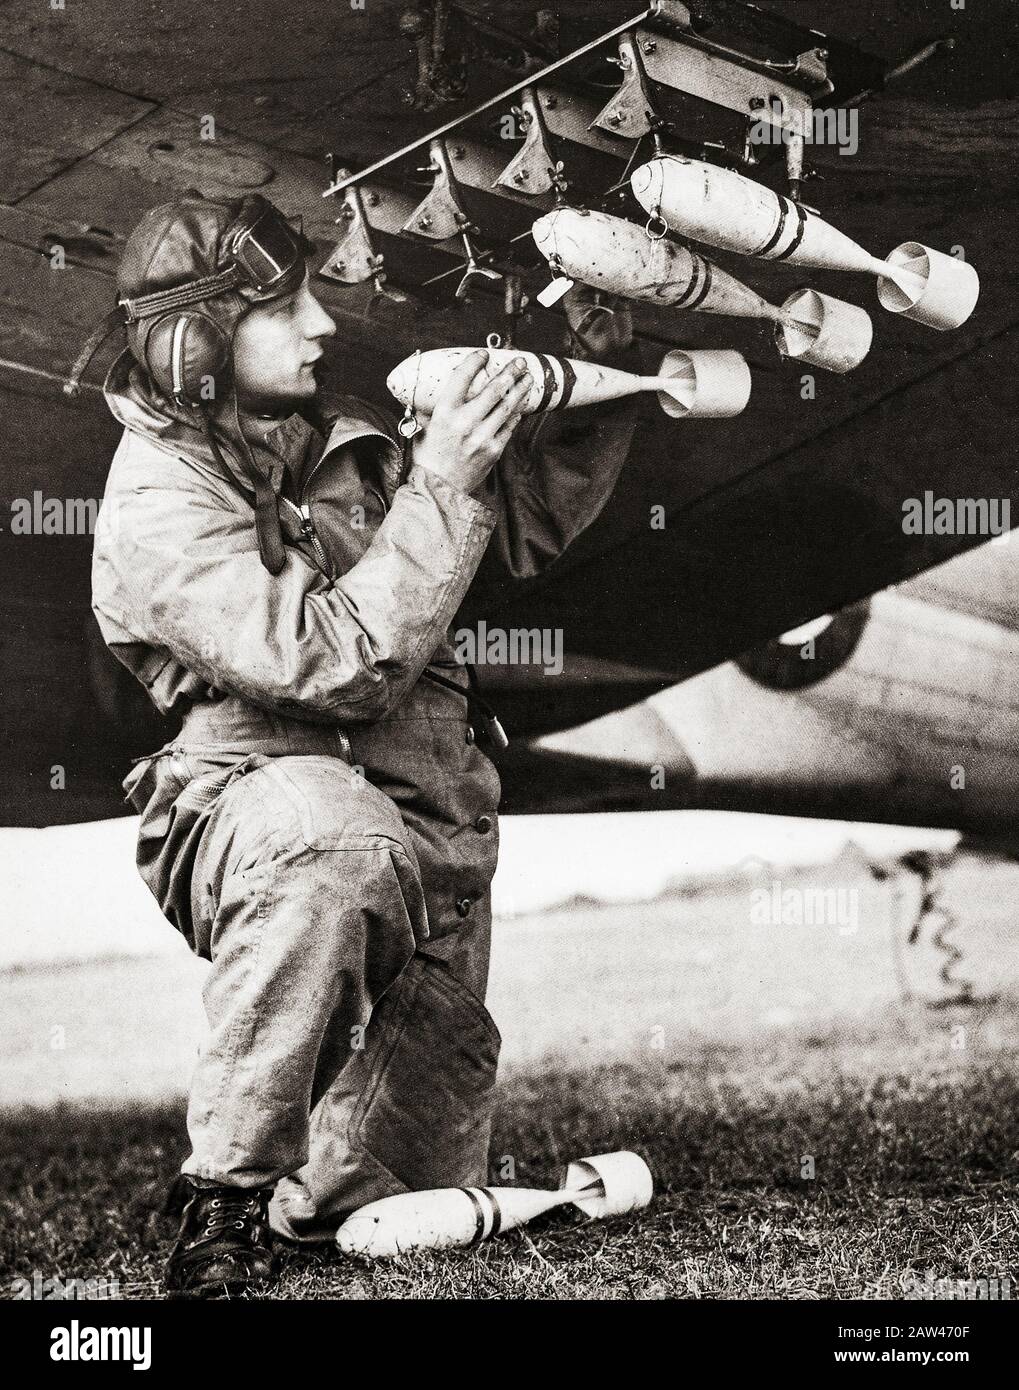 1940: Loading practice bombs that explode with a small puff of smoke enabling observers to see the results of the pilots efforts. Stock Photo